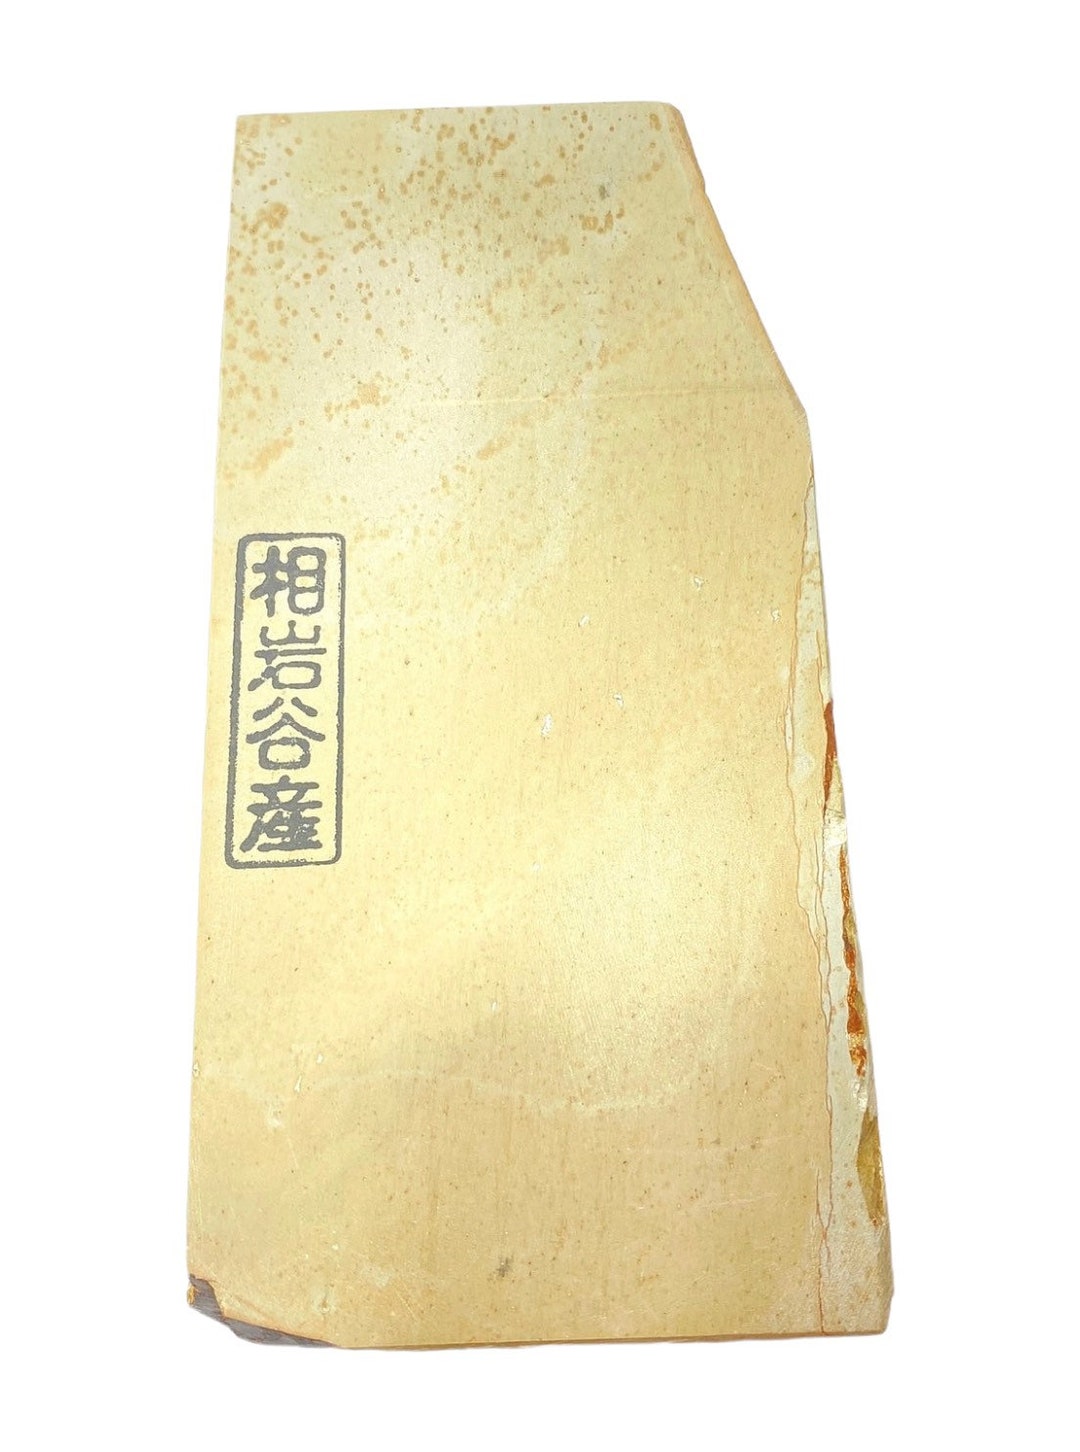 S6521 Japanese Whetstone High-quality Vintage Oil Stone, Old